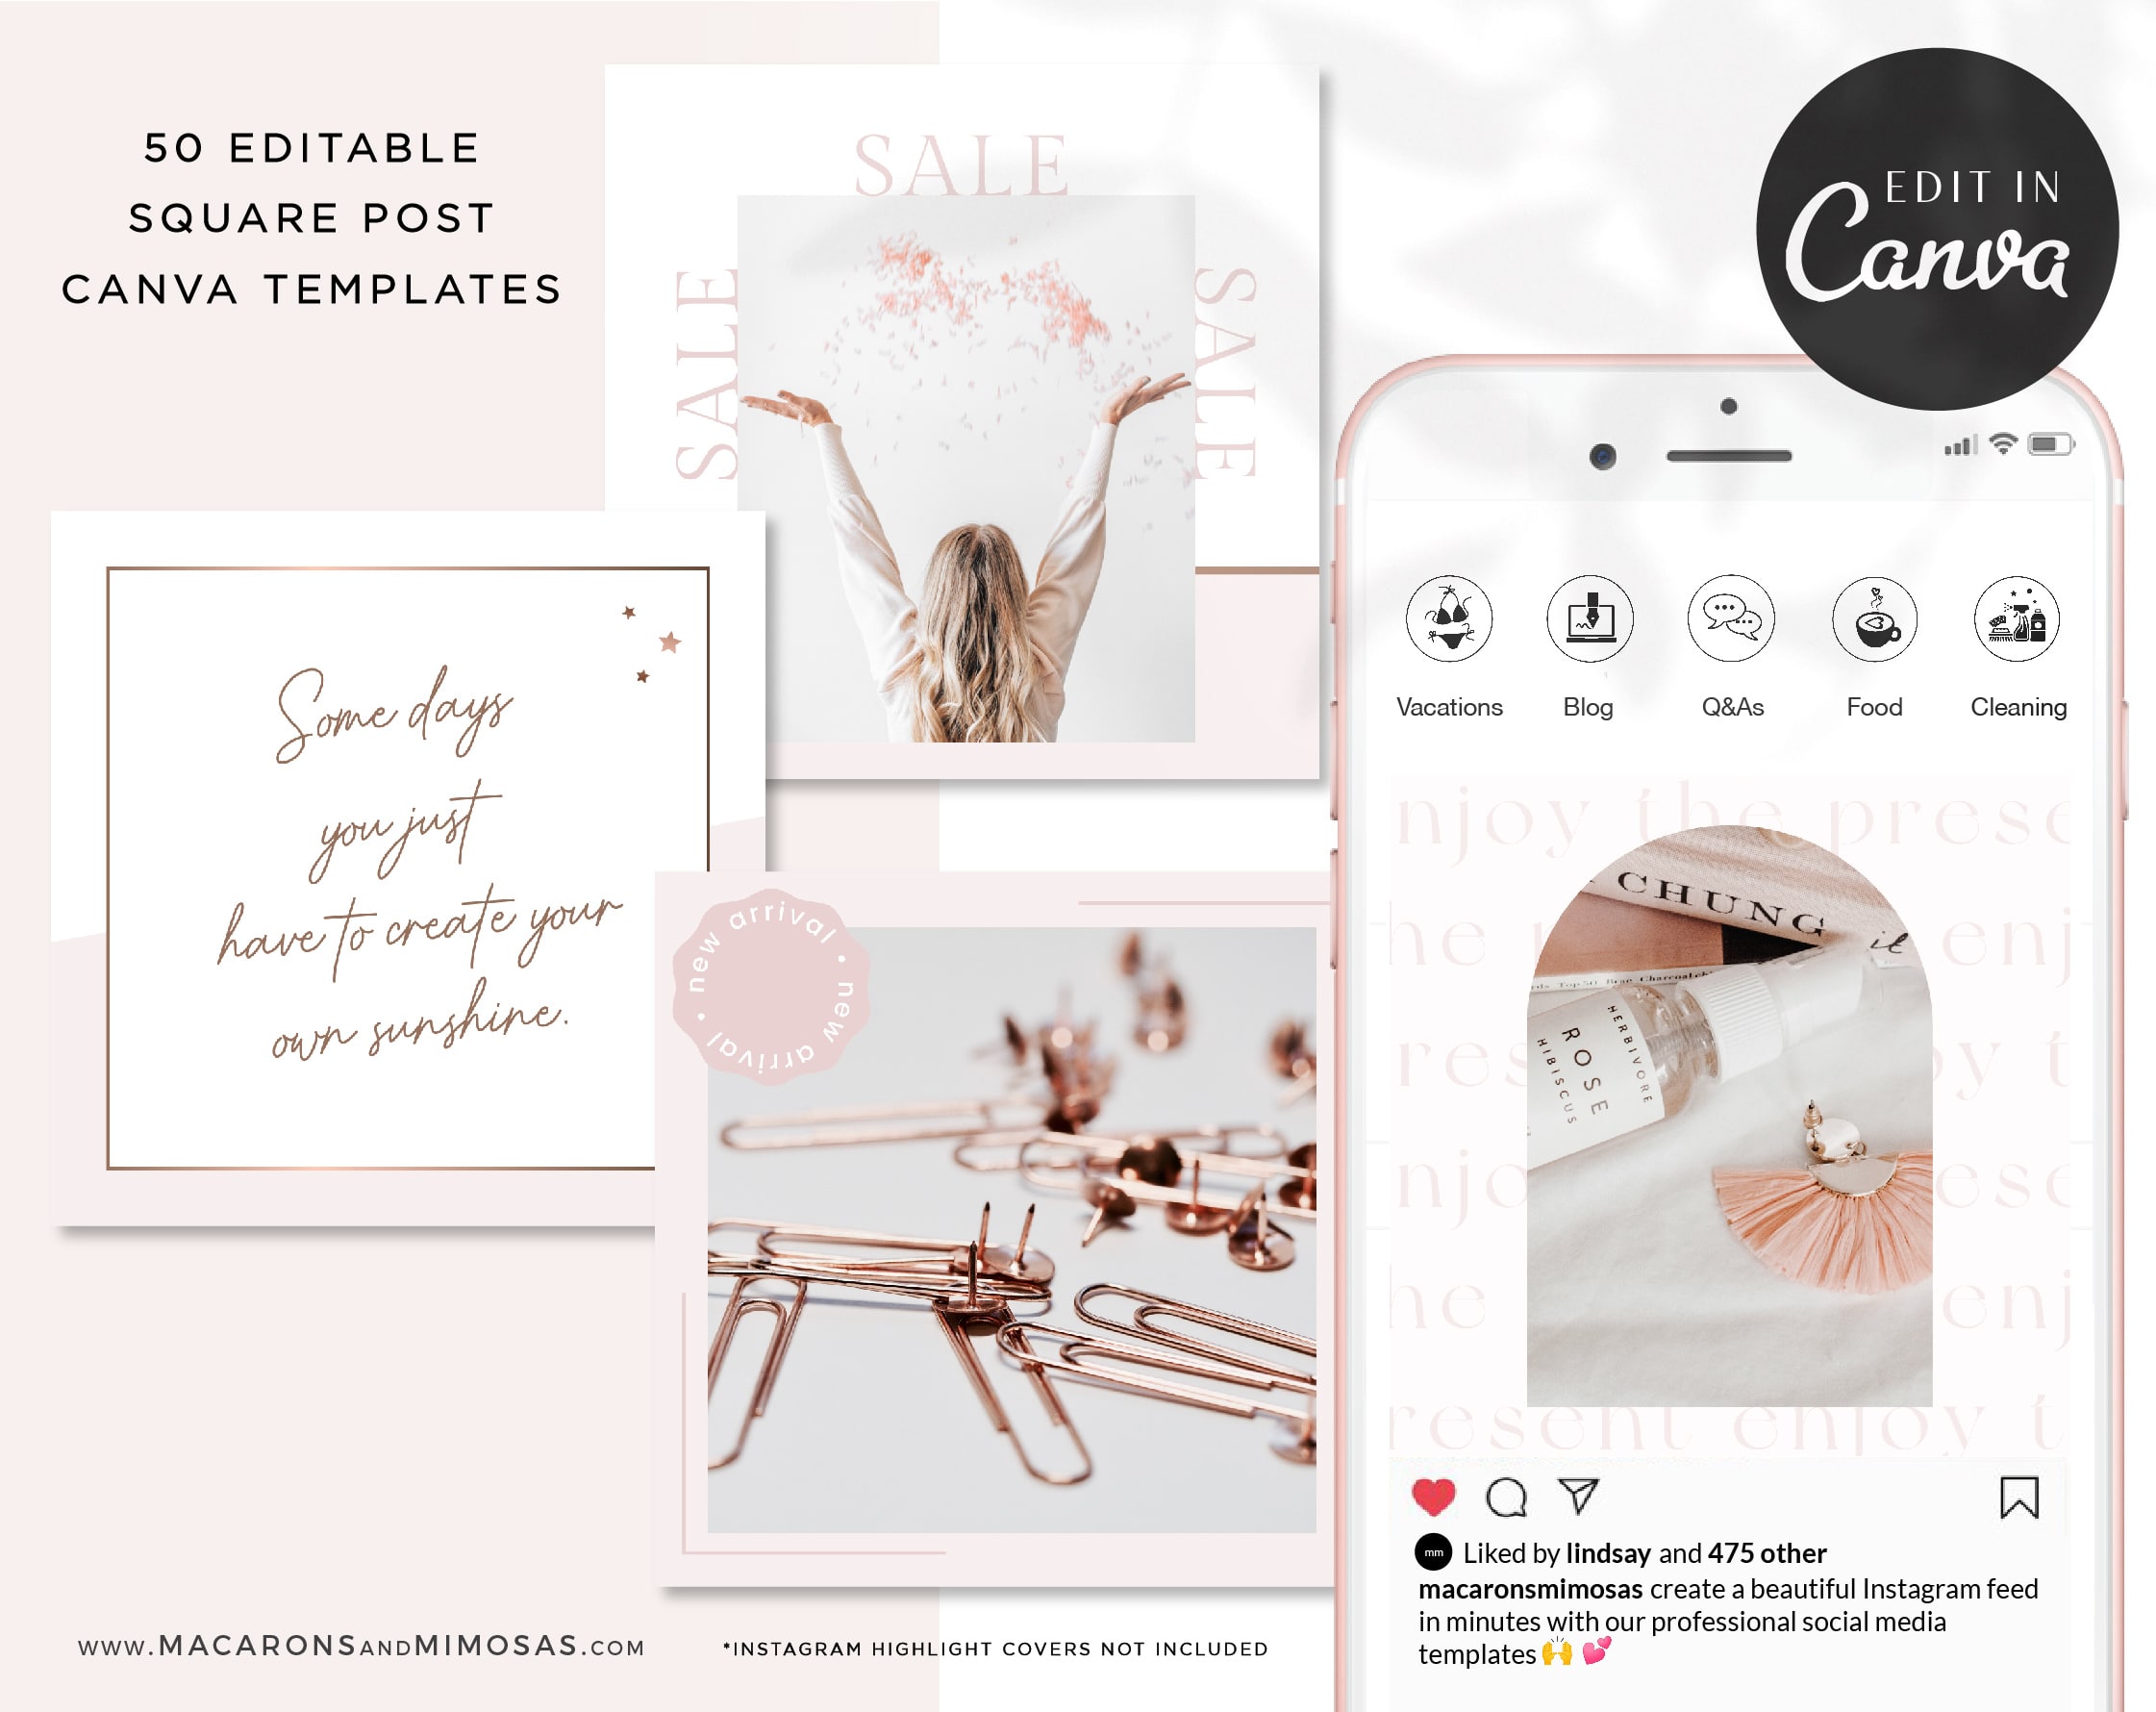 Rose Gold Instagram Post Templates for Canva, Pink Instagram Templates for Stories and Posts, Canva Beauty Templates for Instagram Reels